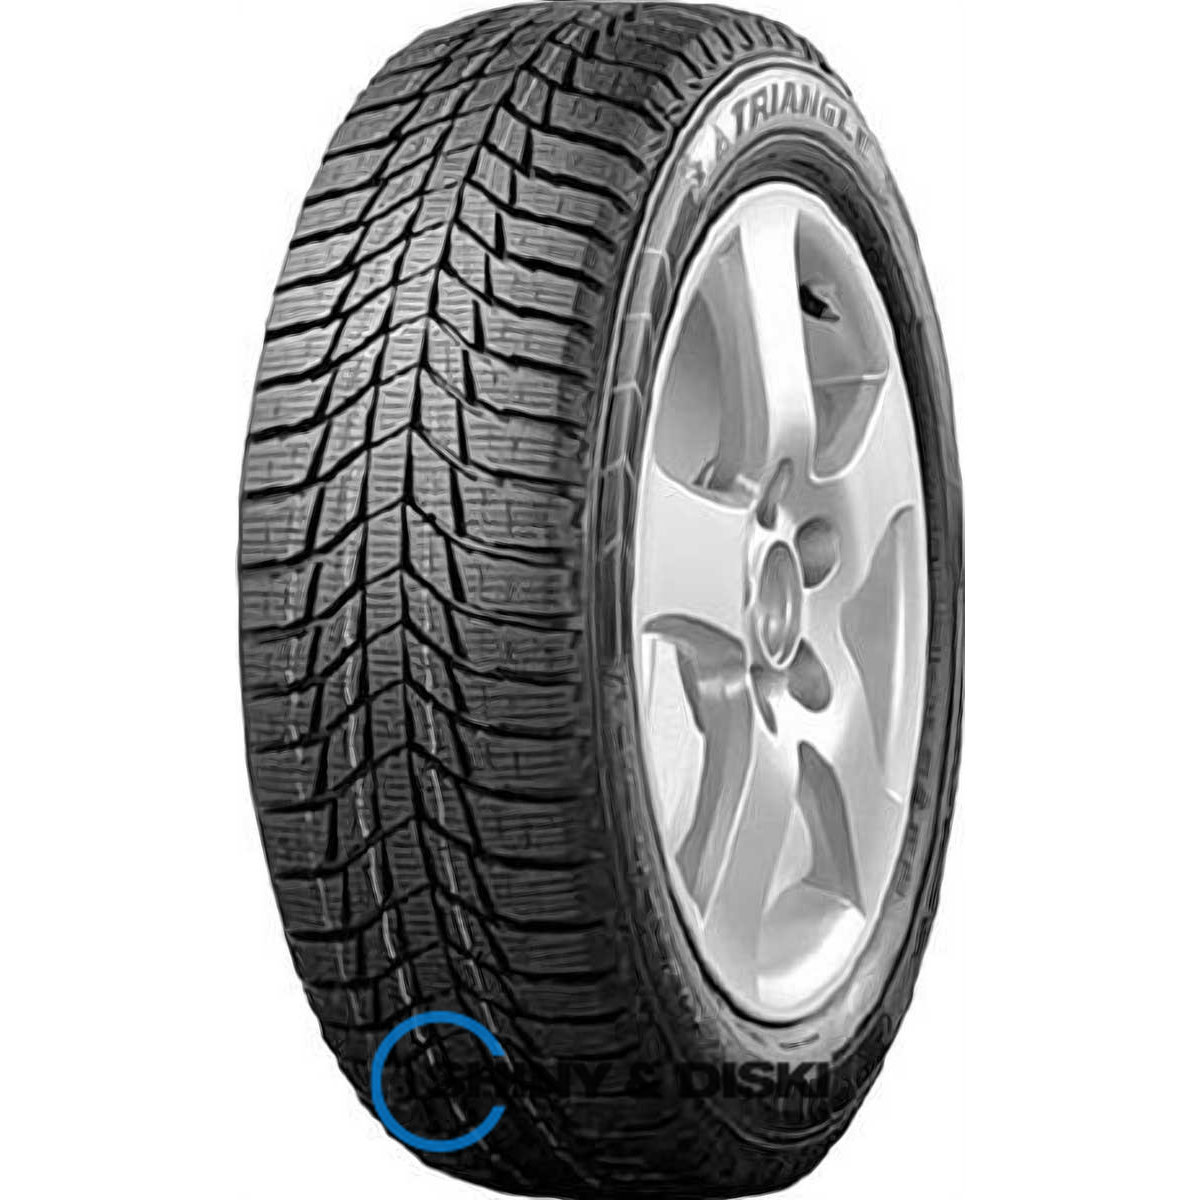 покрышки triangle pl01 185/70 r14 92r